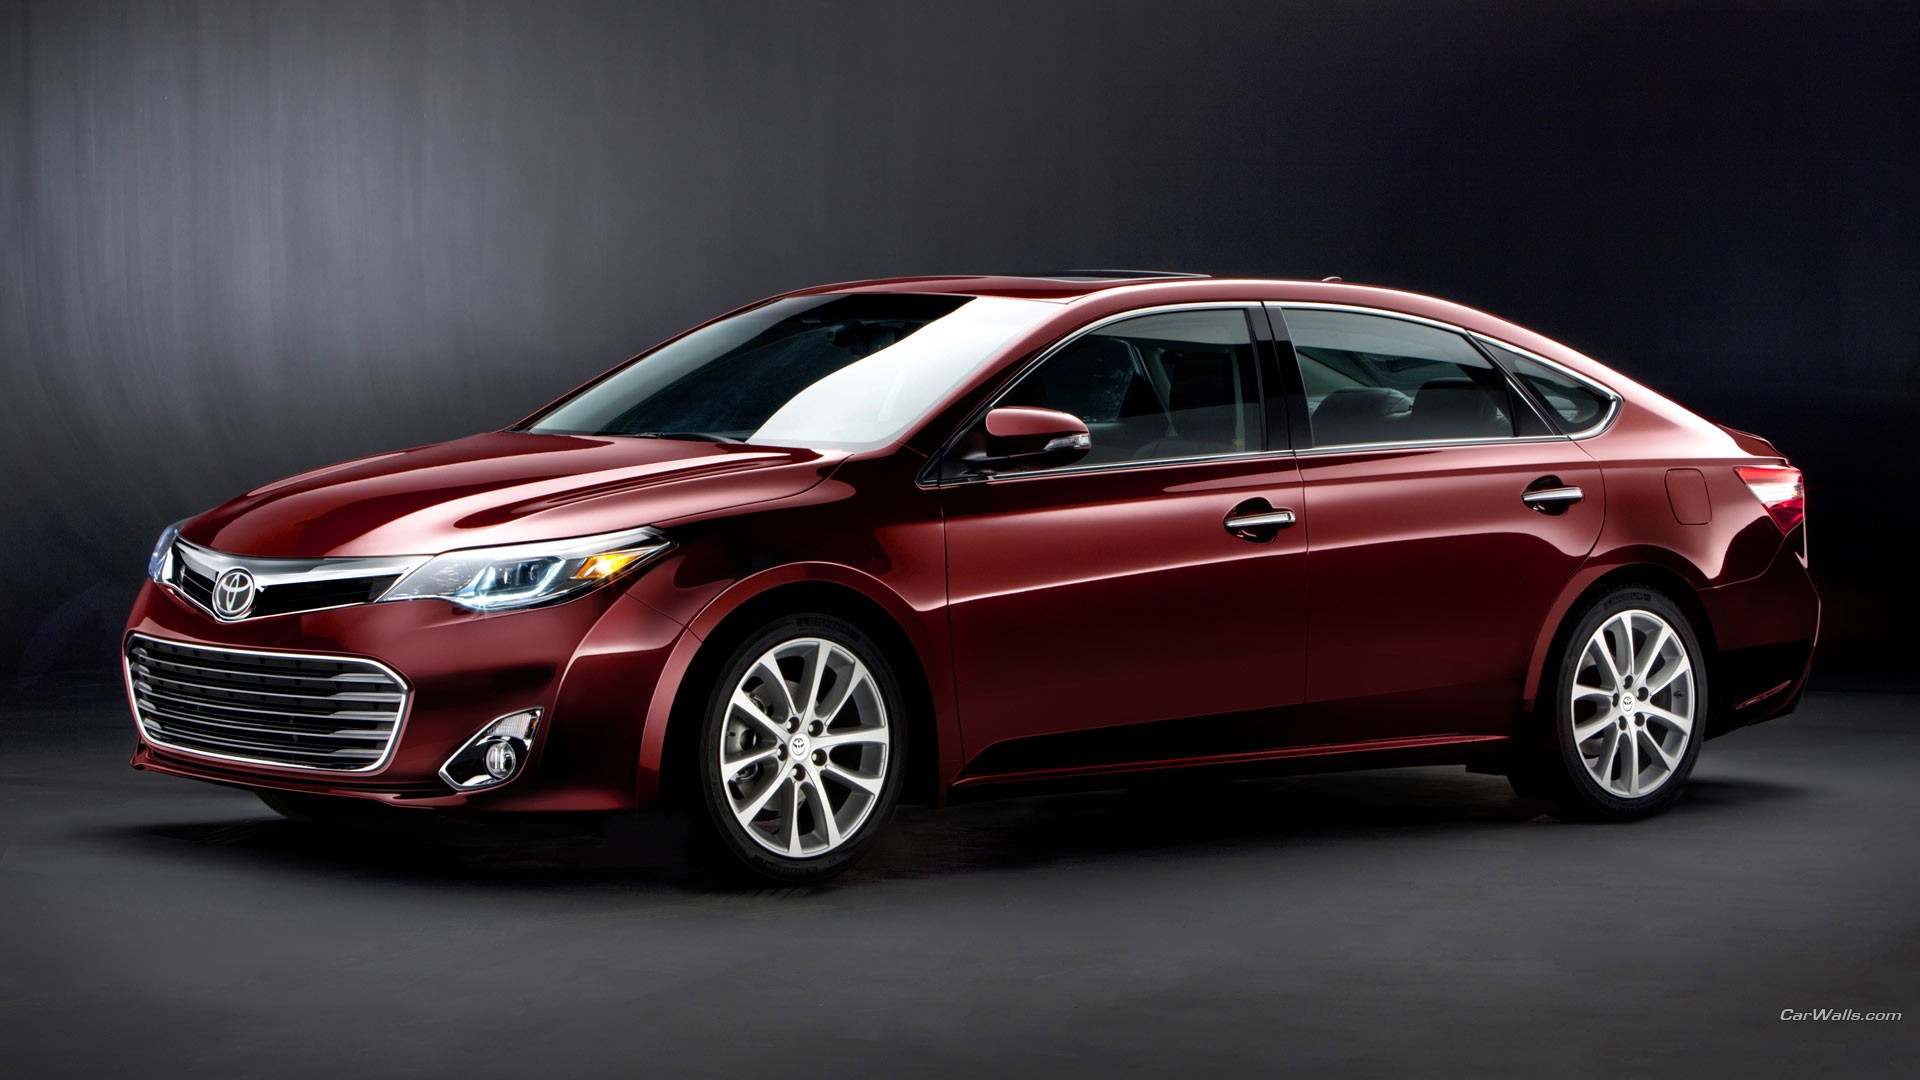 Toyota Avalon, Car Wallpapers HD / Desktop and Mobile Backgrounds